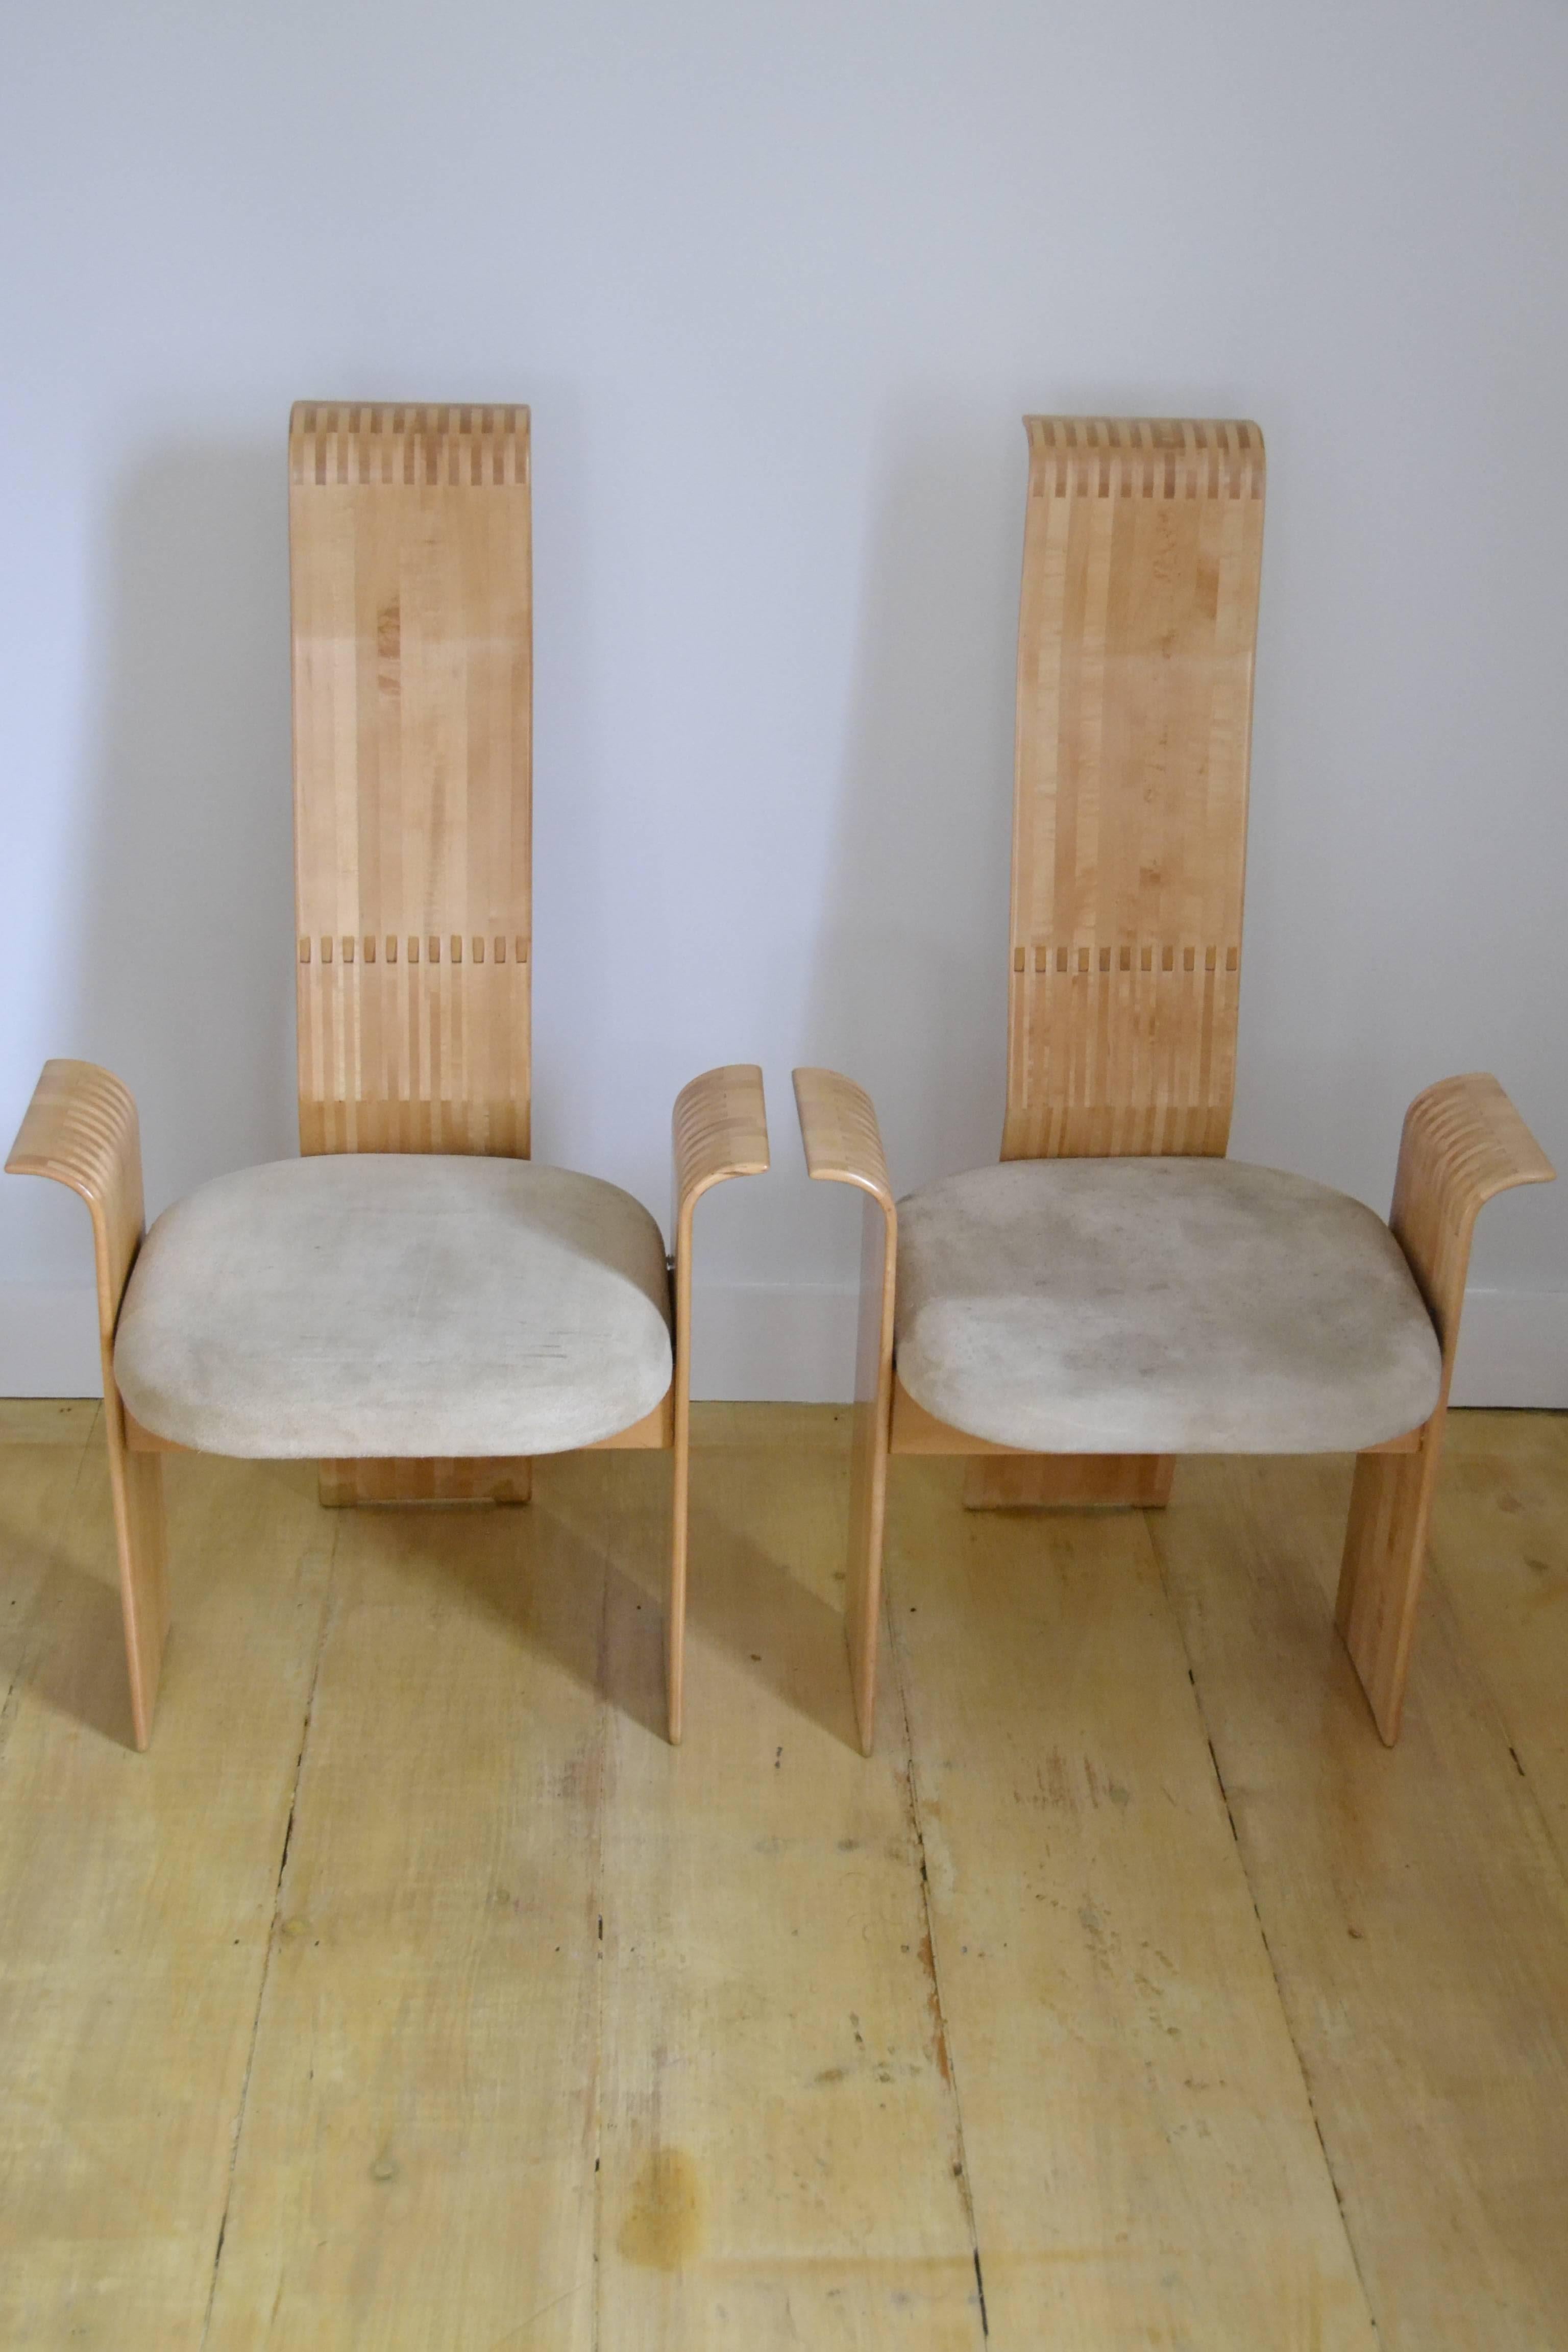 Mid-Century Modern Berthold Schwaiger Studio Crafted Laminated Chairs Signed and Dated 1985 